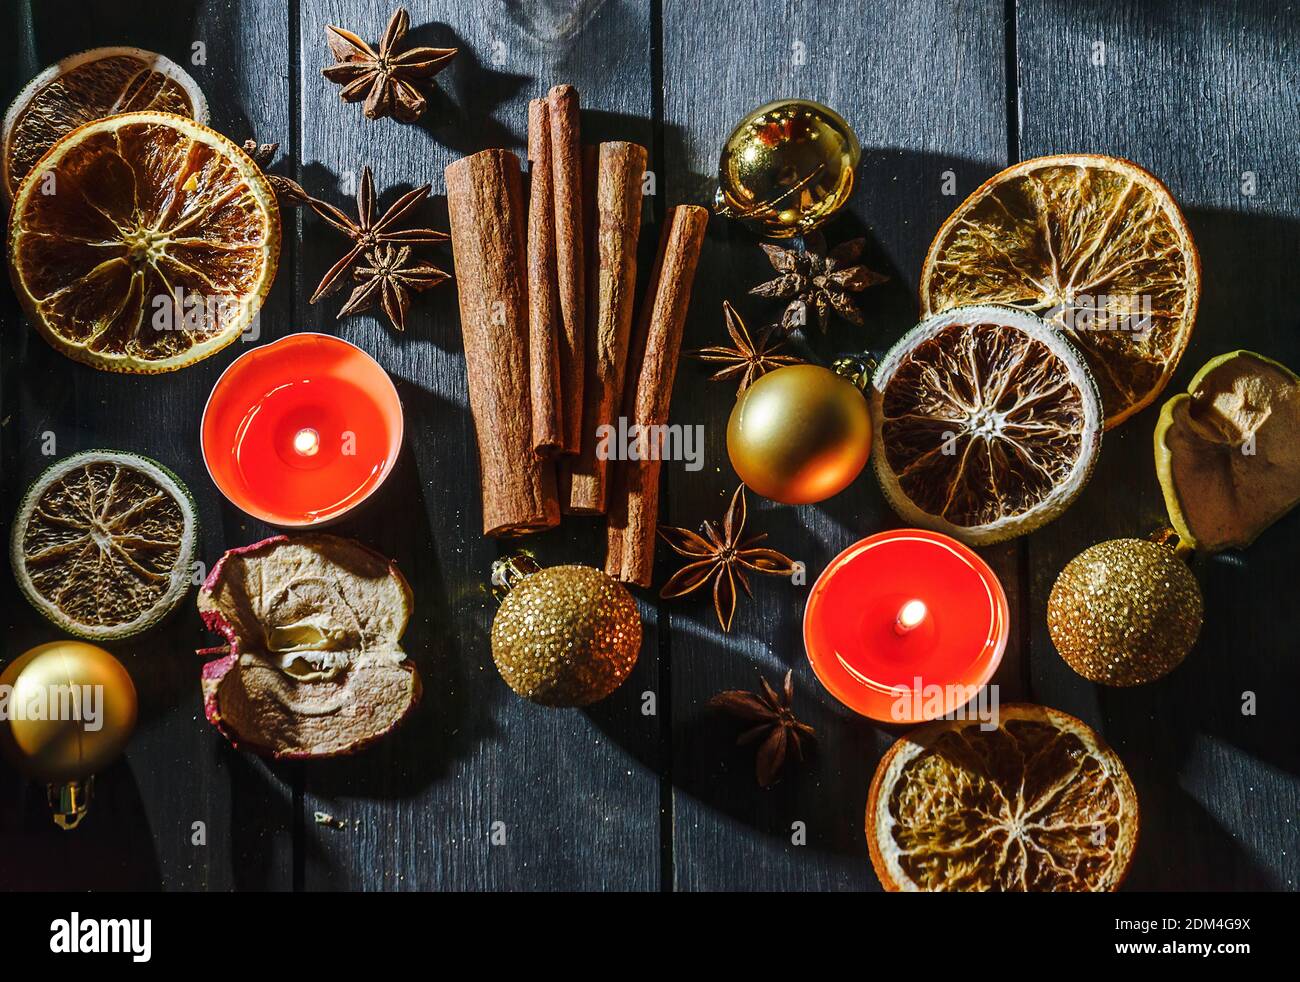 Christmas still life with cinnamon sticks, orange slices and candles Stock Photo